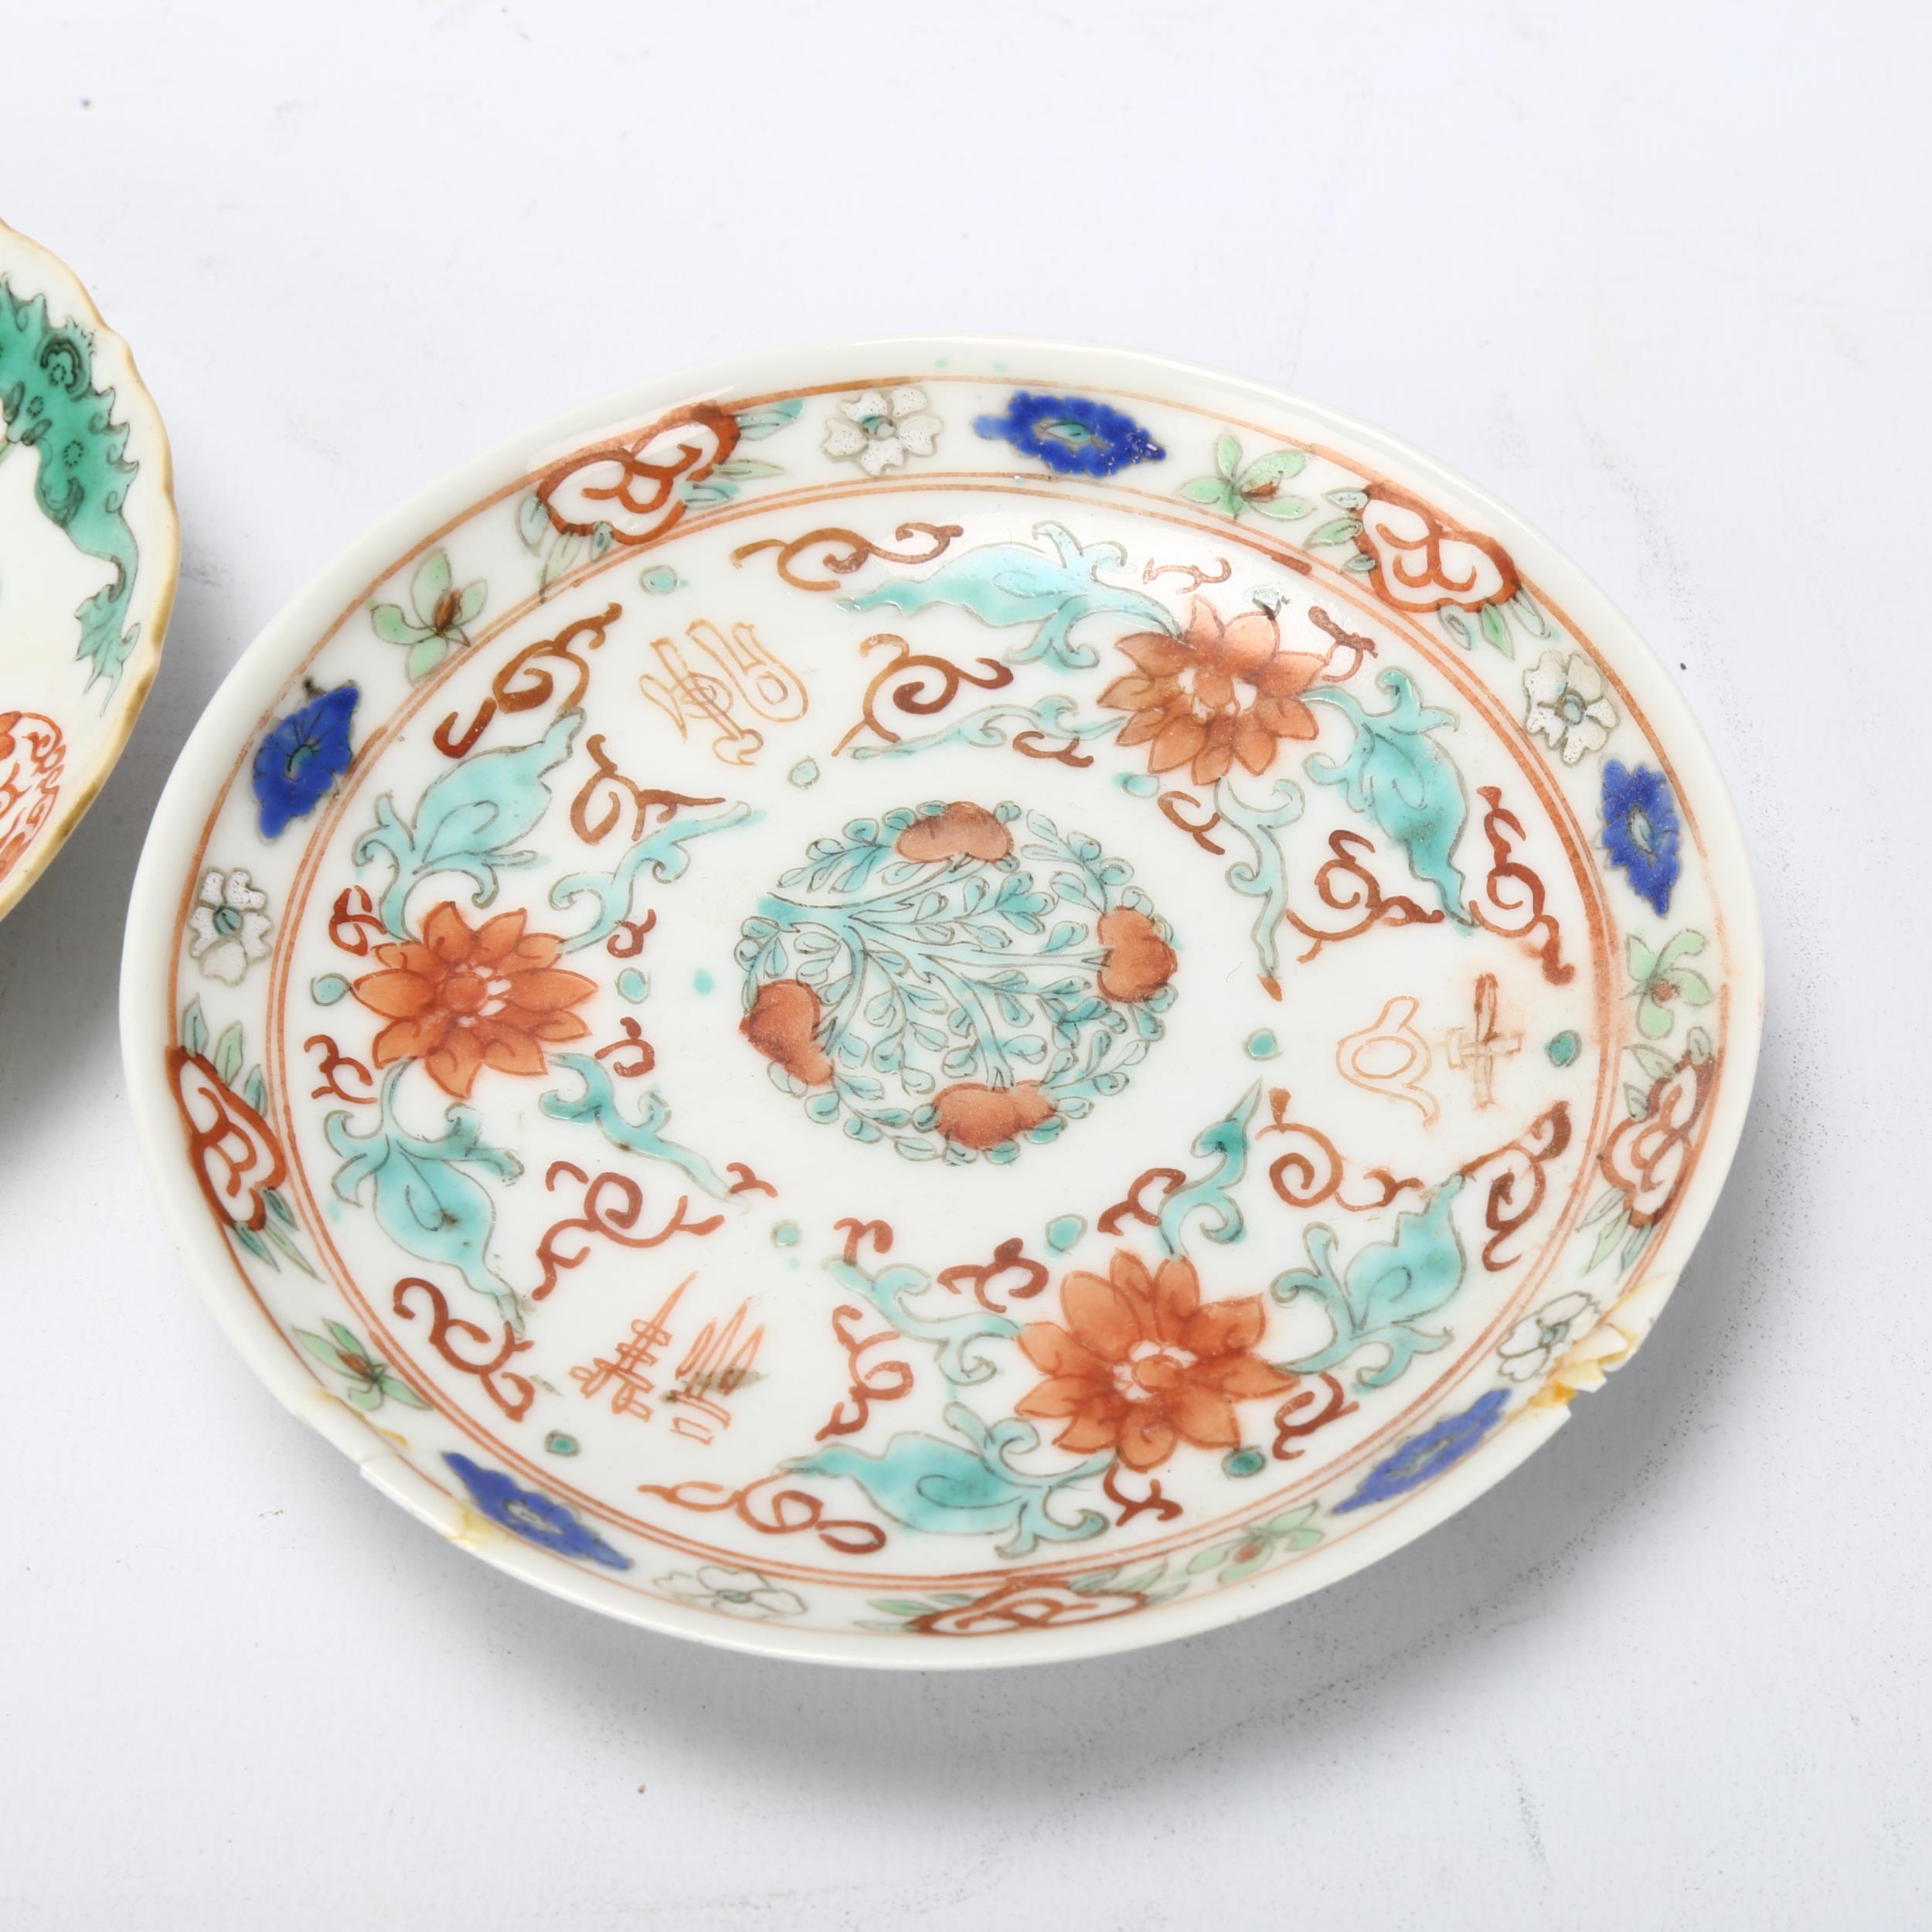 2 small Chinese porcelain dishes with painted decoration, largest 13cm across Largest dish has 2 rim - Bild 2 aus 3